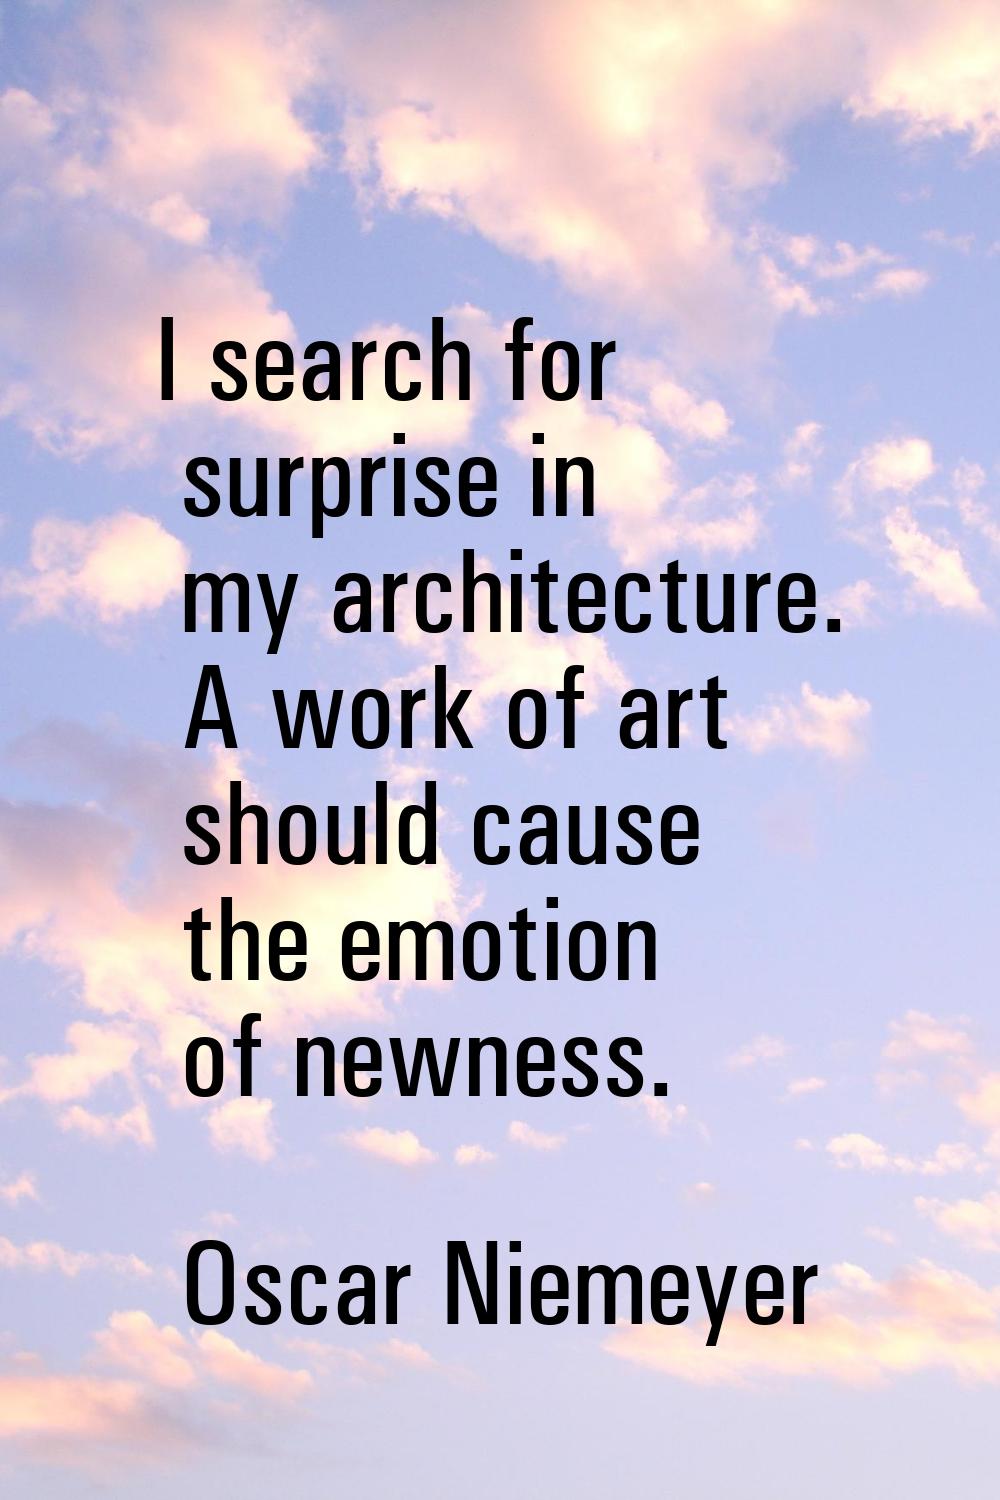 I search for surprise in my architecture. A work of art should cause the emotion of newness.